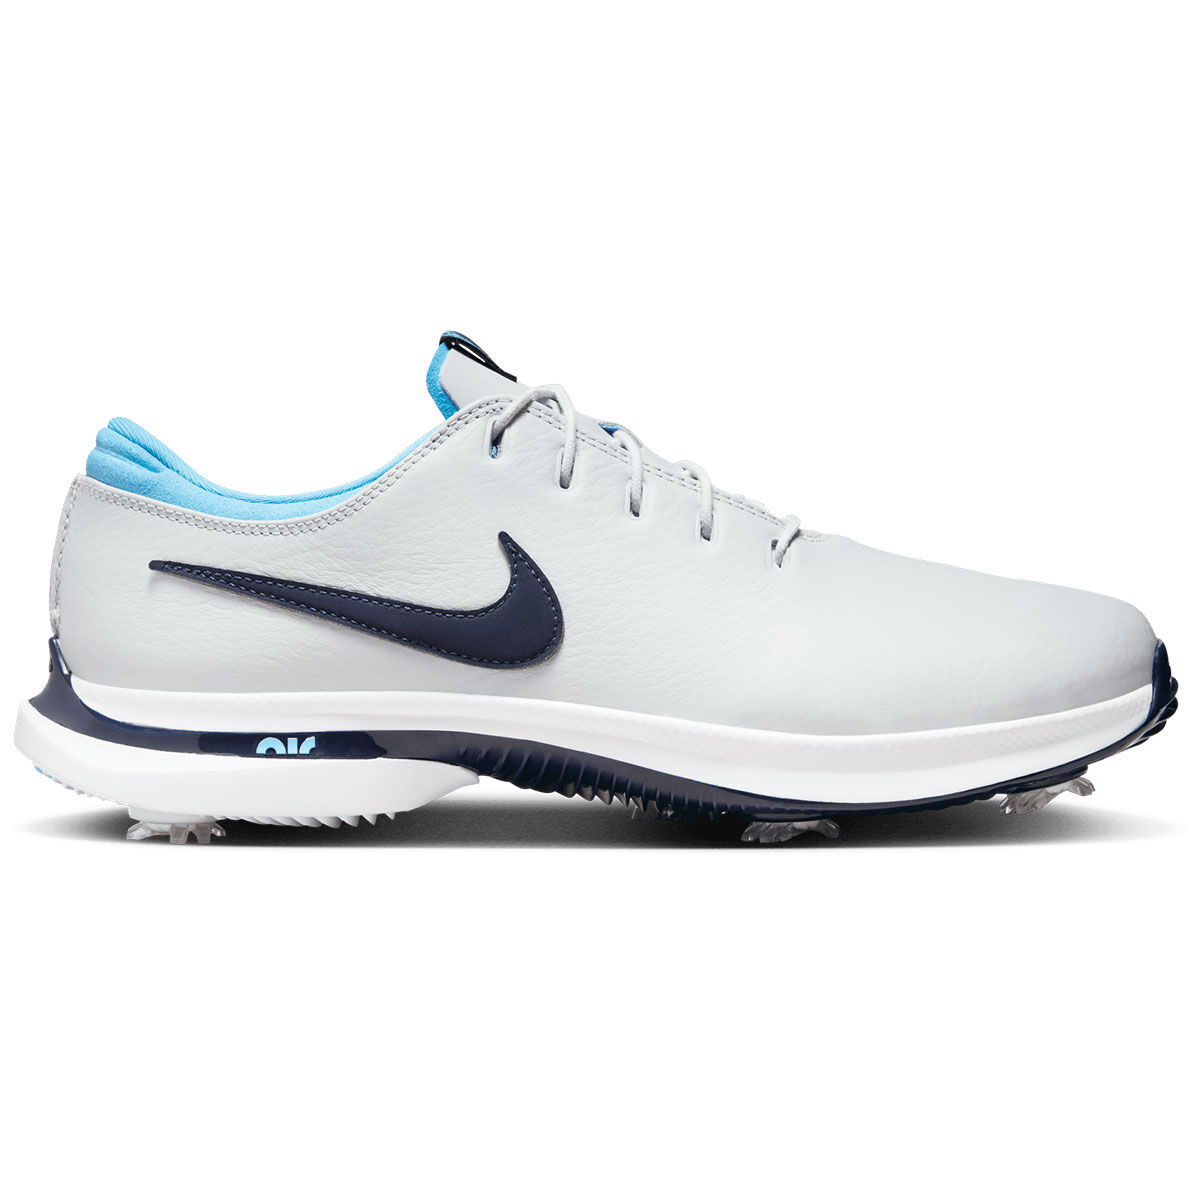 Nike Air Zoom Victory Tour 3 Waterproof Spiked Golf Shoes, Mens, Pure platinum/obsidian/white, 7 | American Golf